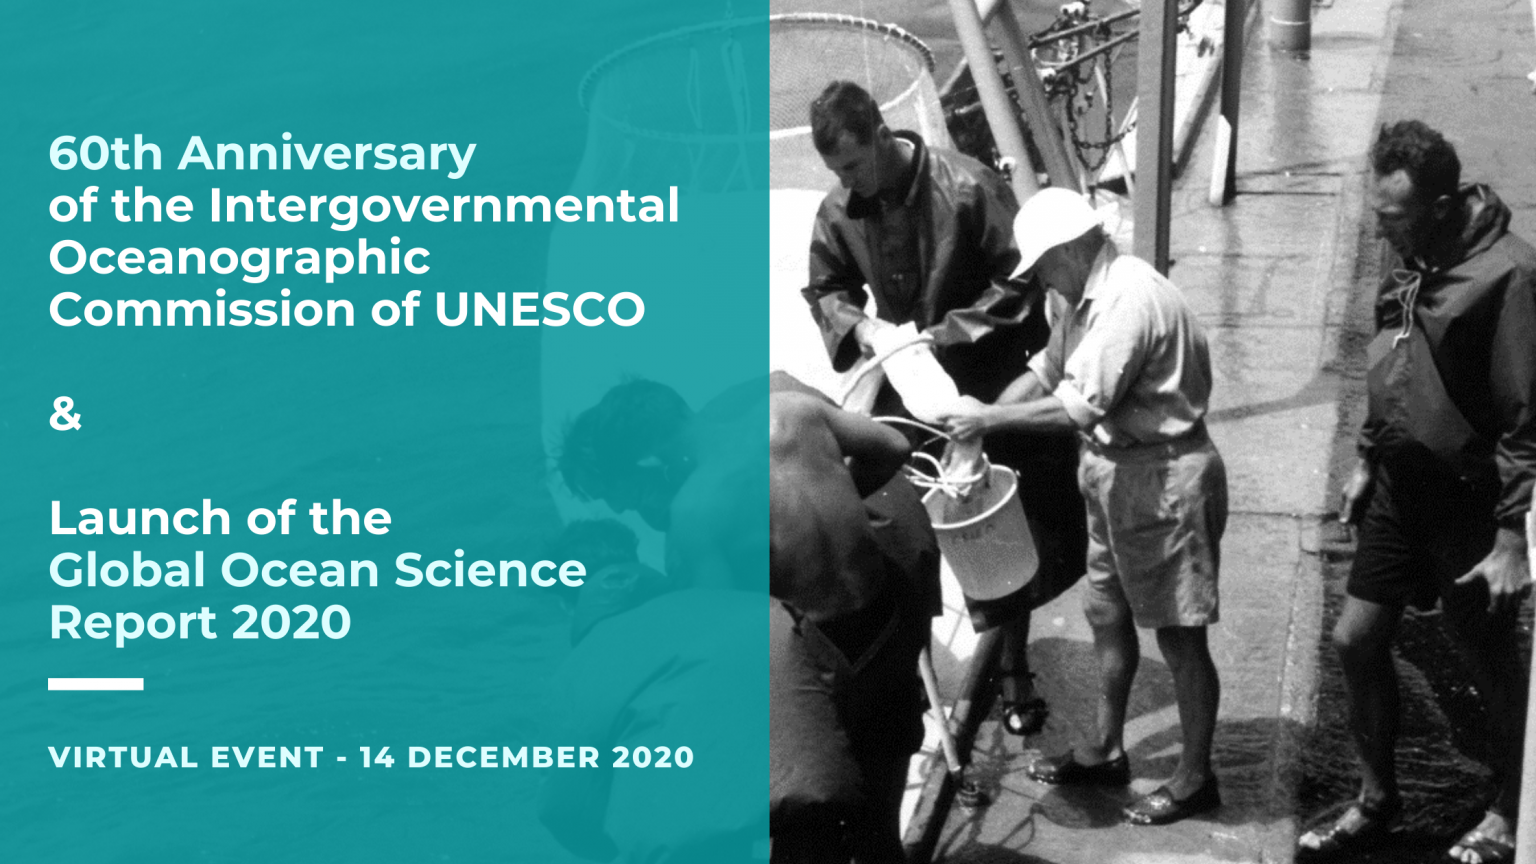 60th Anniversary of the Intergovernmental Oceanographic Commission of UNESCO & Launch of the Global Ocean Science Report 2020